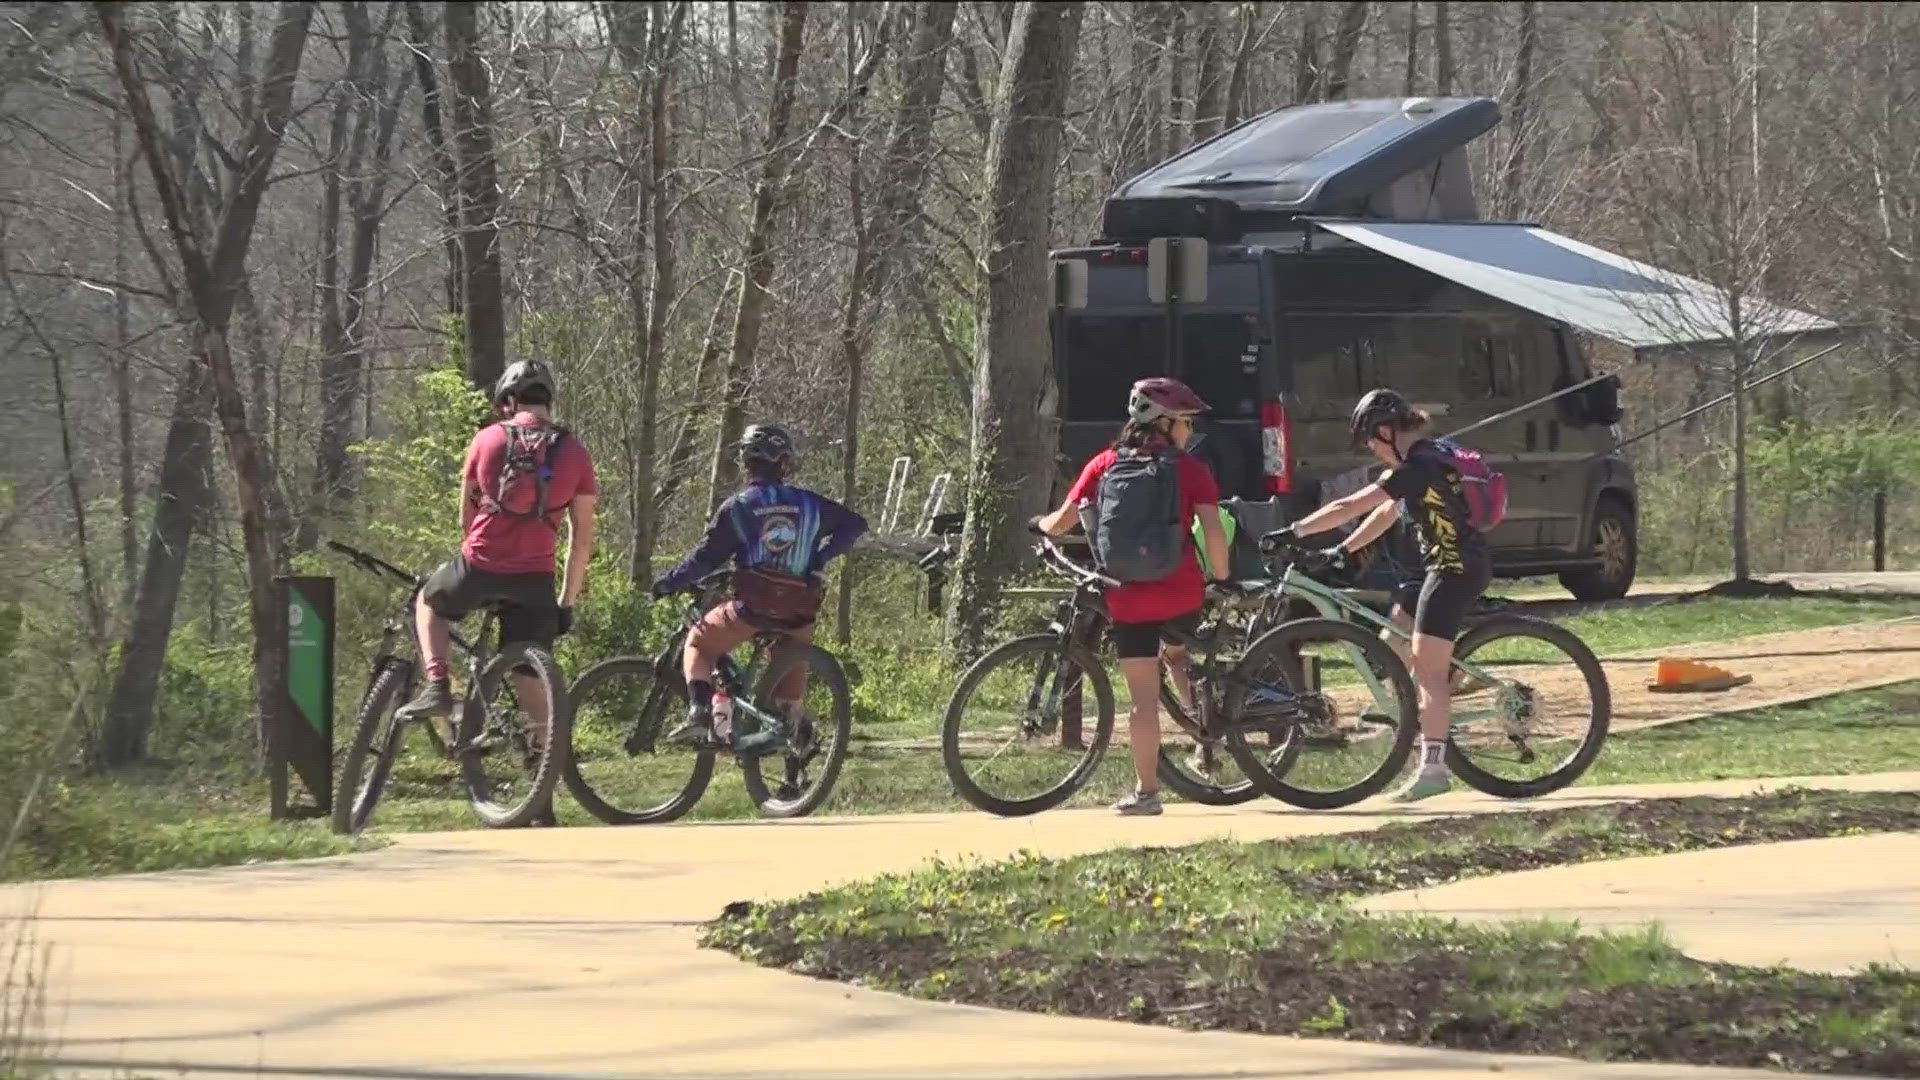 A new program hopes to promote mental and physical health while taking advantage of the outdoors.